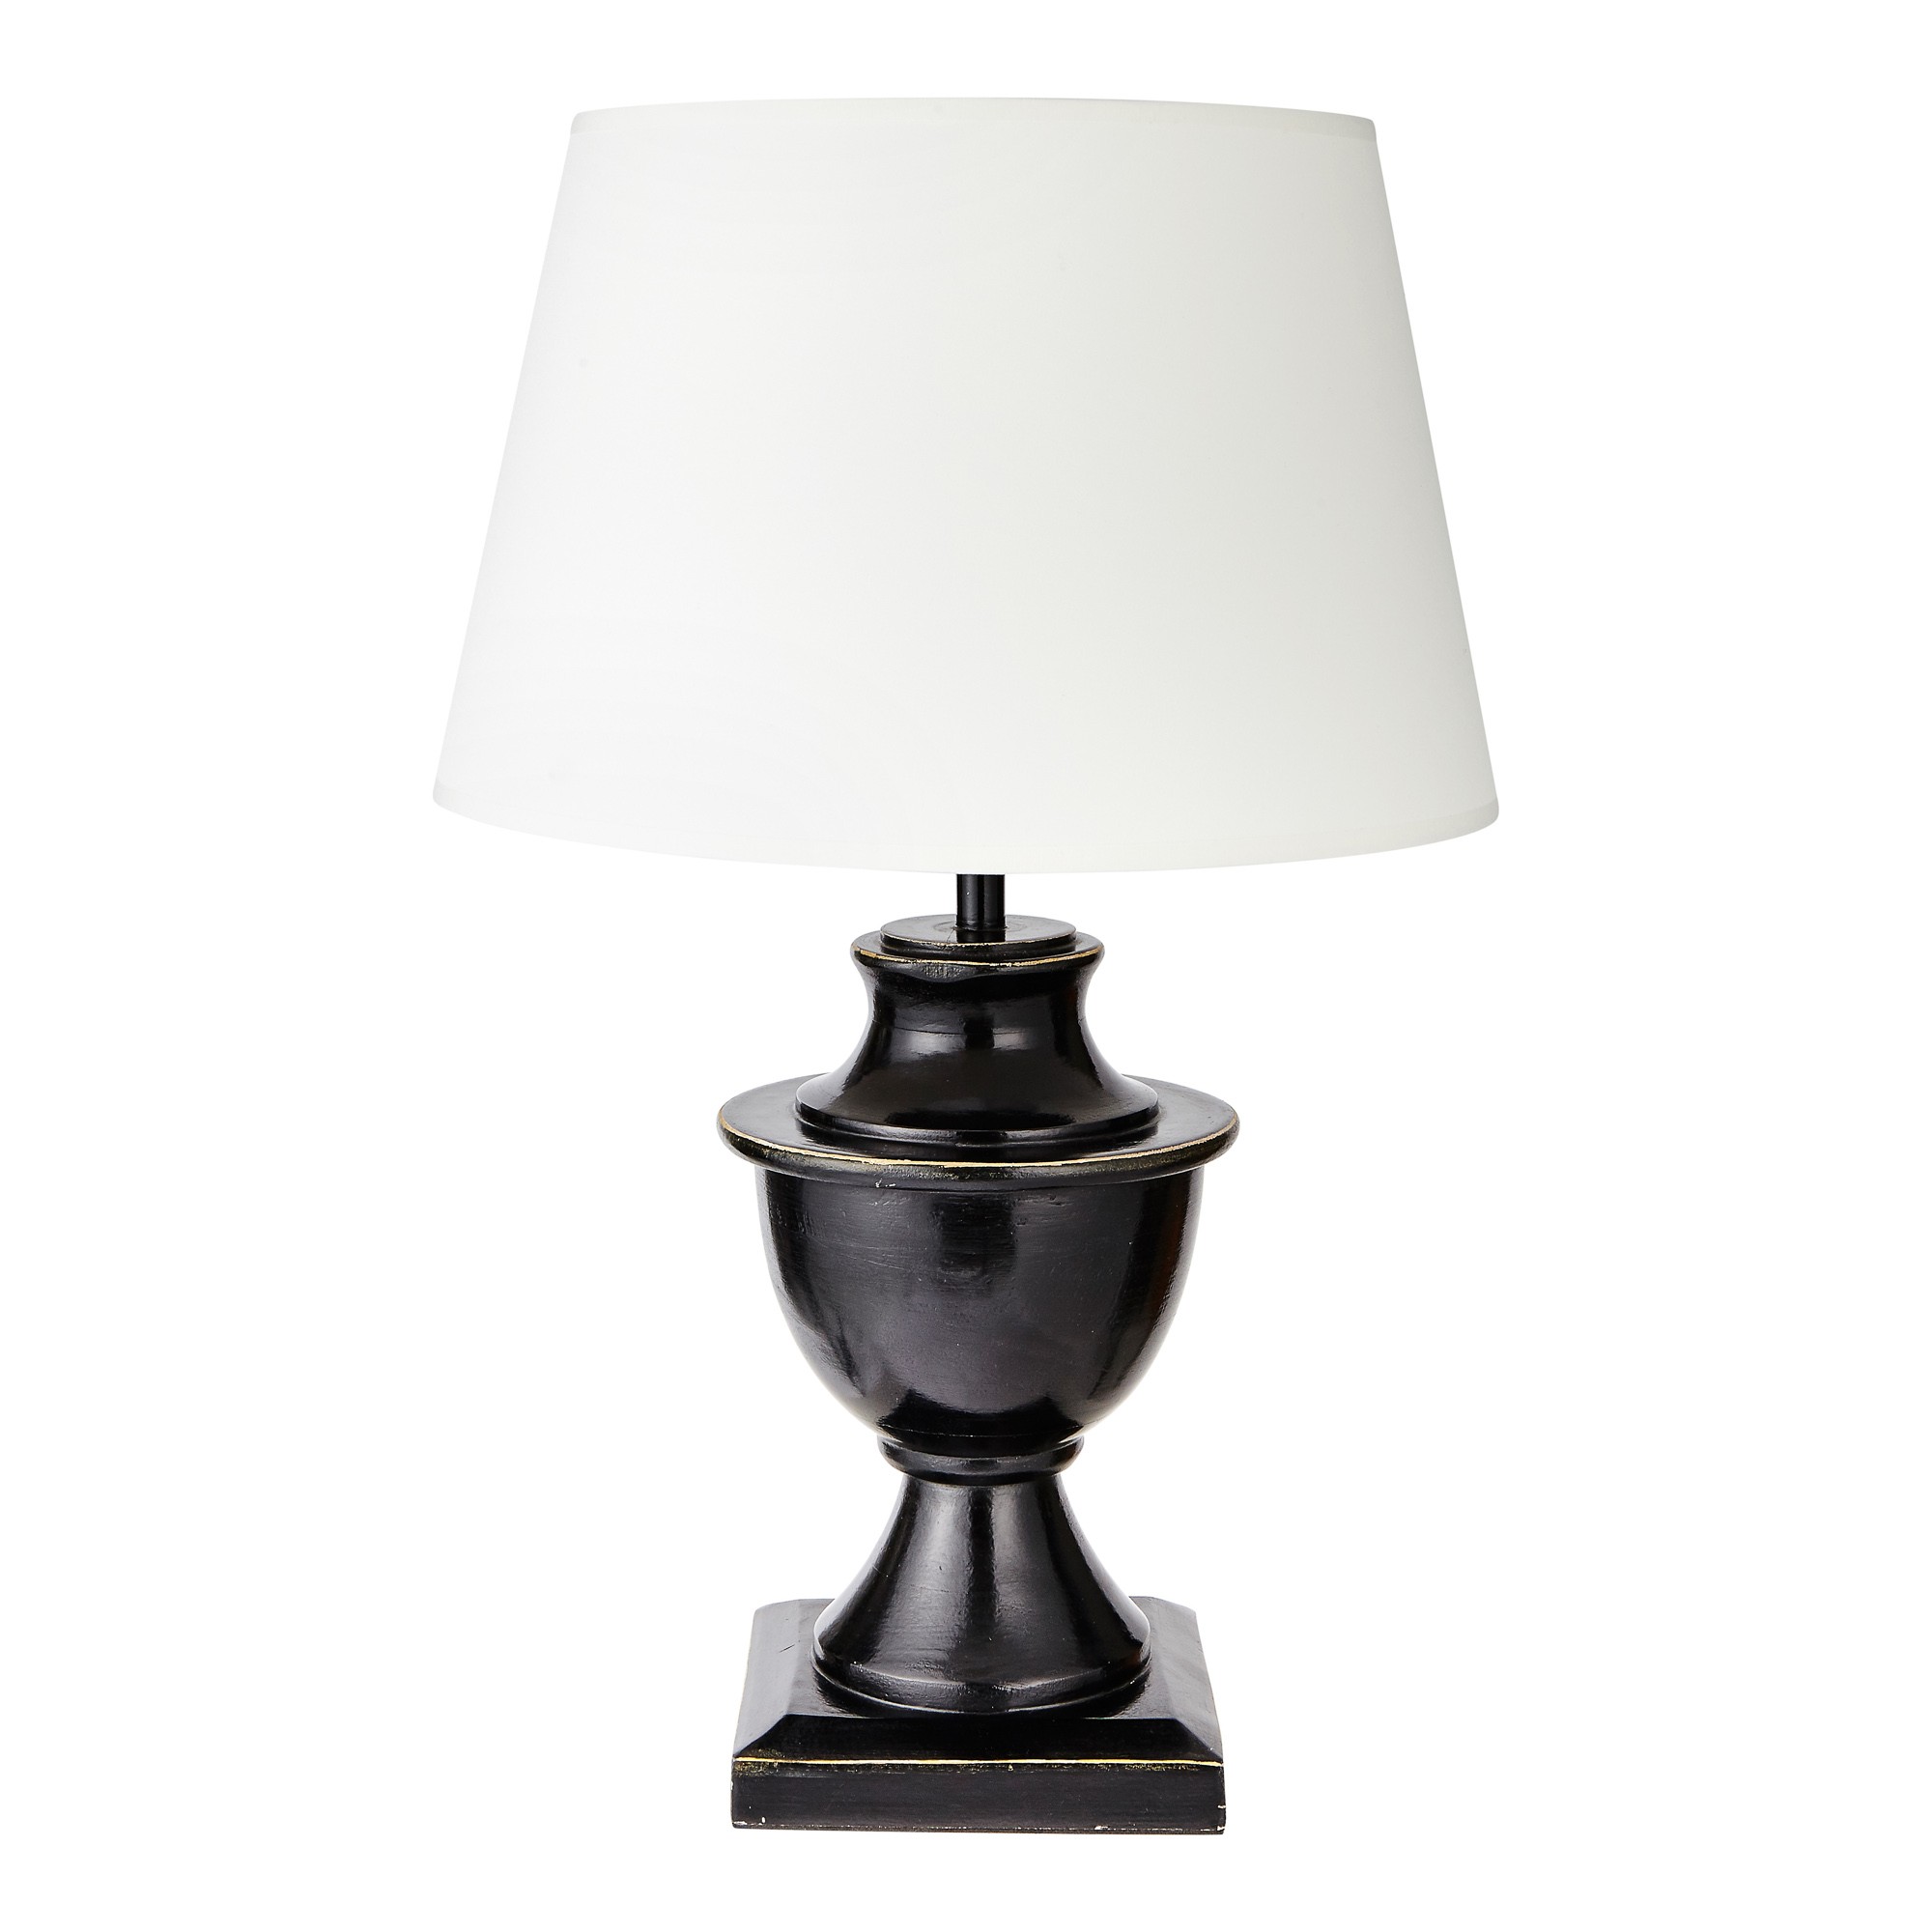 Black Table Lamp With Off White Cotton, Black Table Lamp With White Shade